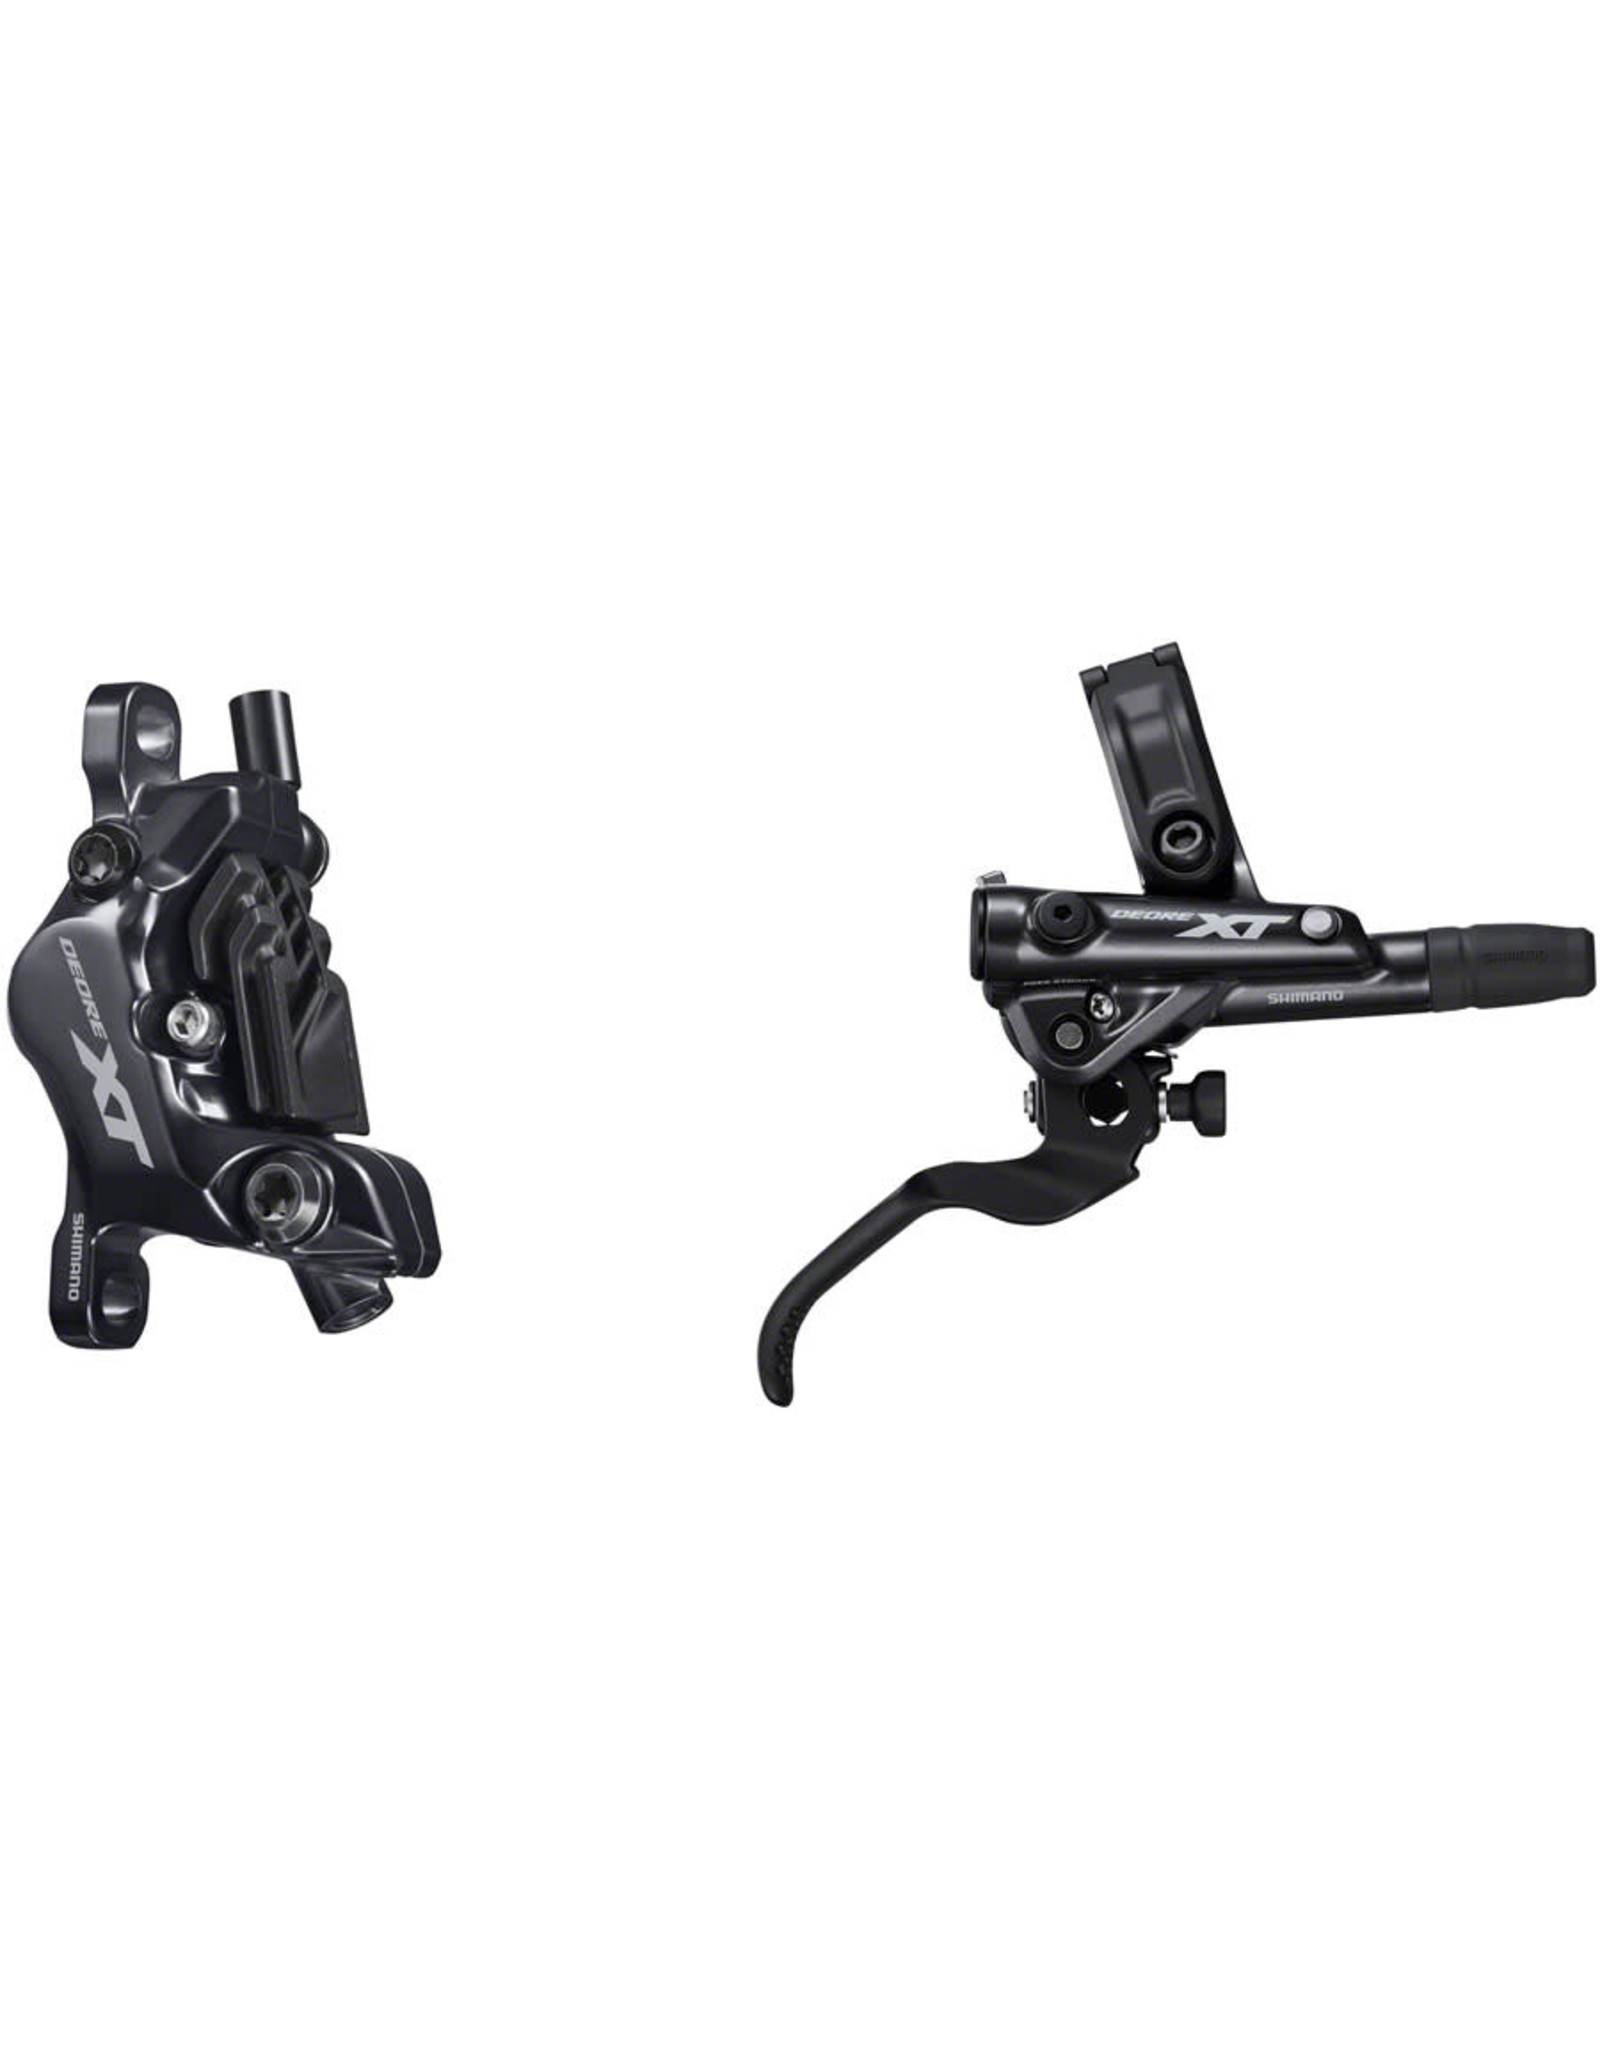 Shimano Shimano Deore XT BL-M8100/BR-M8120 Disc Brake and Lever - Rear, Hydraulic, Post Mount, 4-Piston, Finned Metal Pads, Black